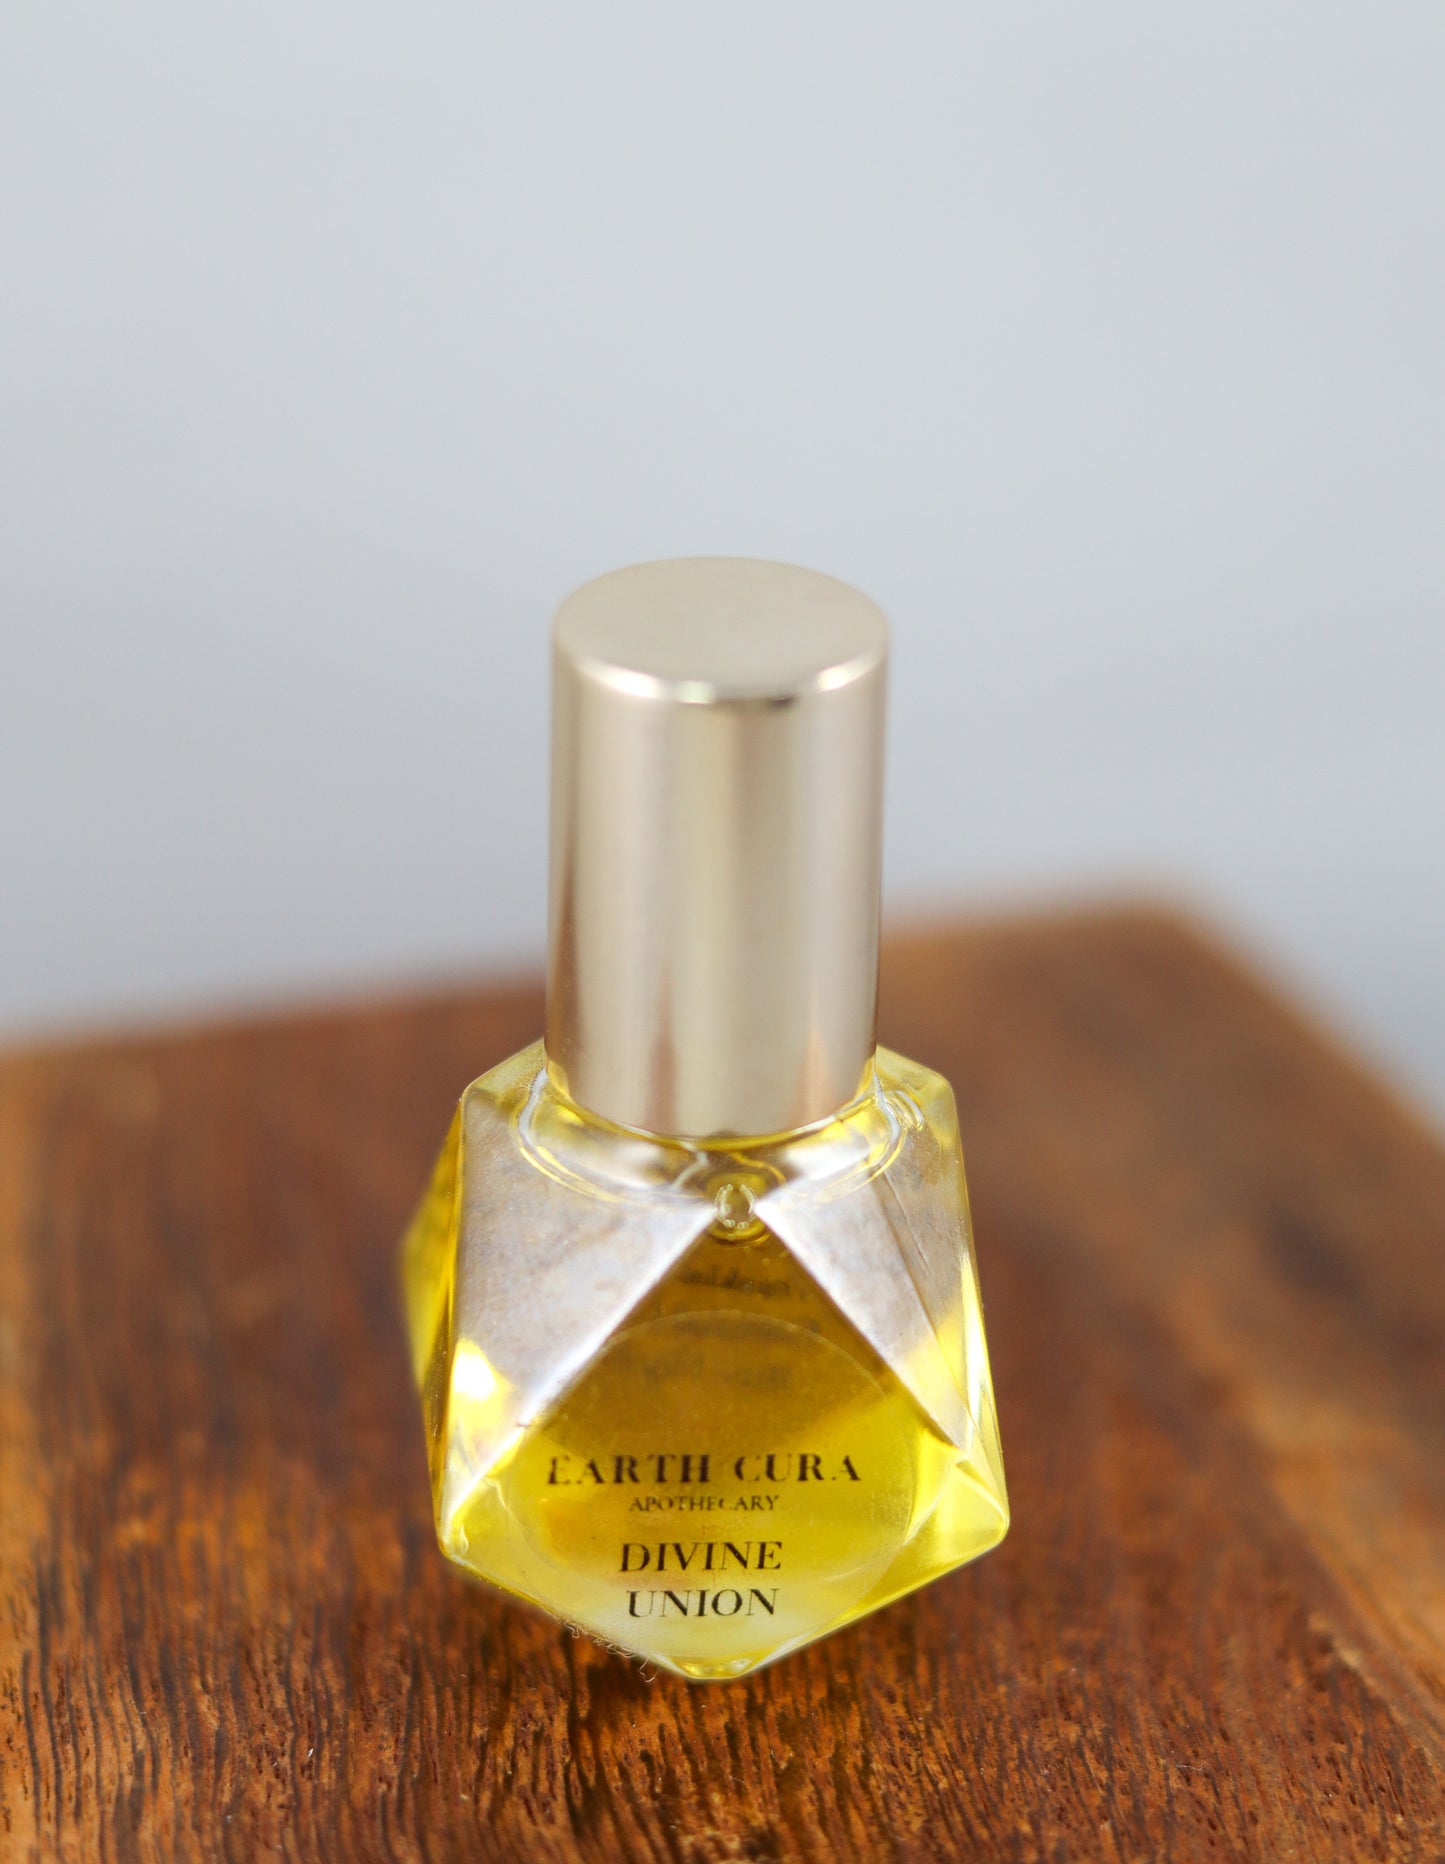 ROSE & FRANKINCENSE PERFUME - Divine Union - Essential Oil Perfume infused in Rose-hip Oil